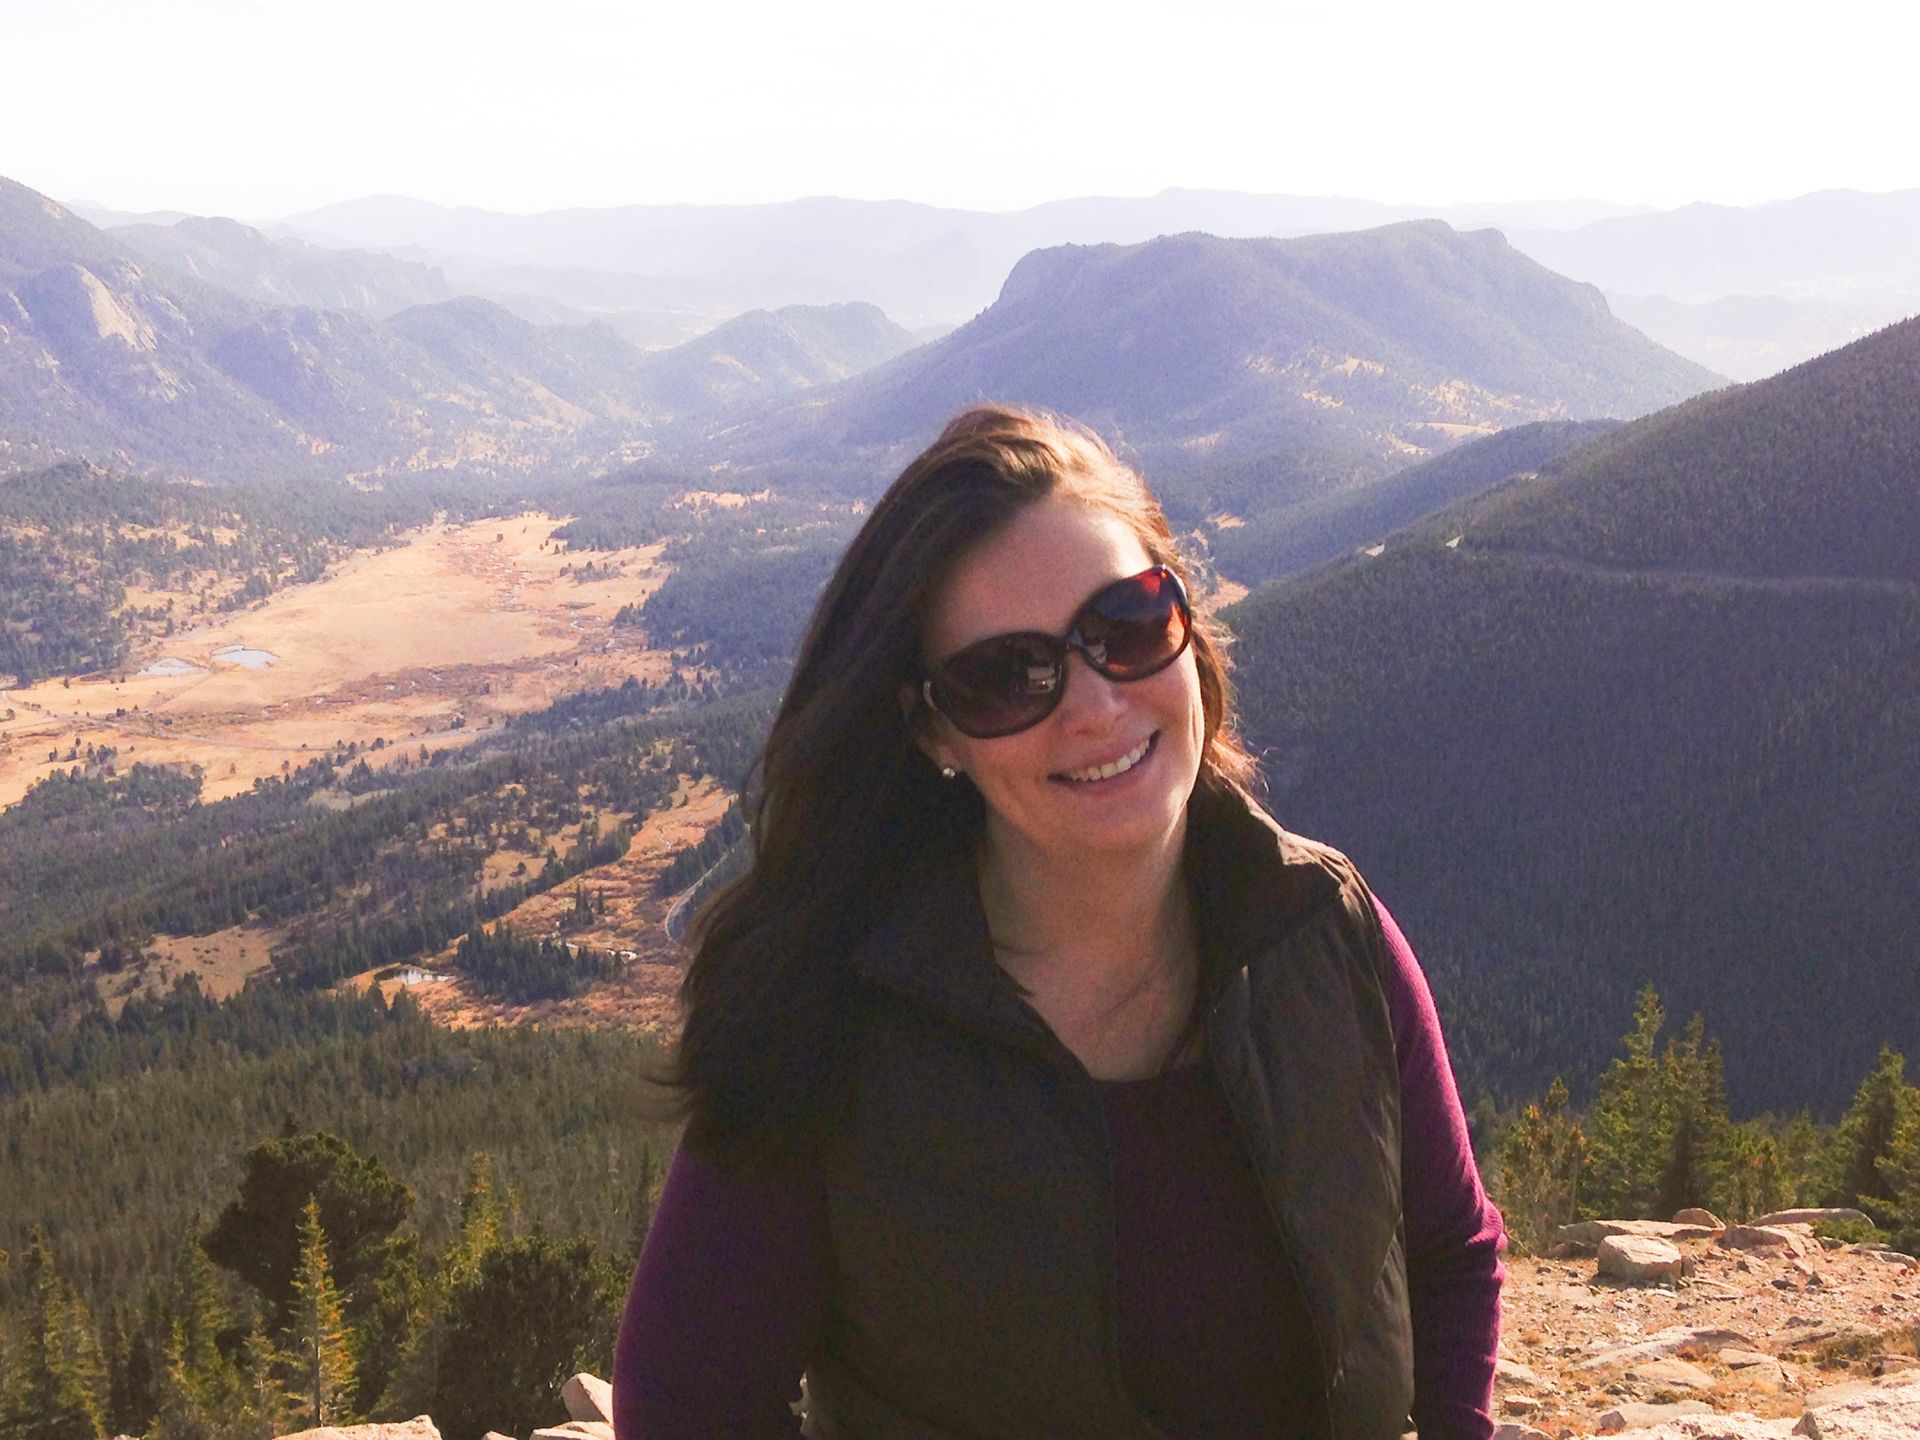 A photo of Neeley smiling with majestic mountains in the background, symbolizing strength. 